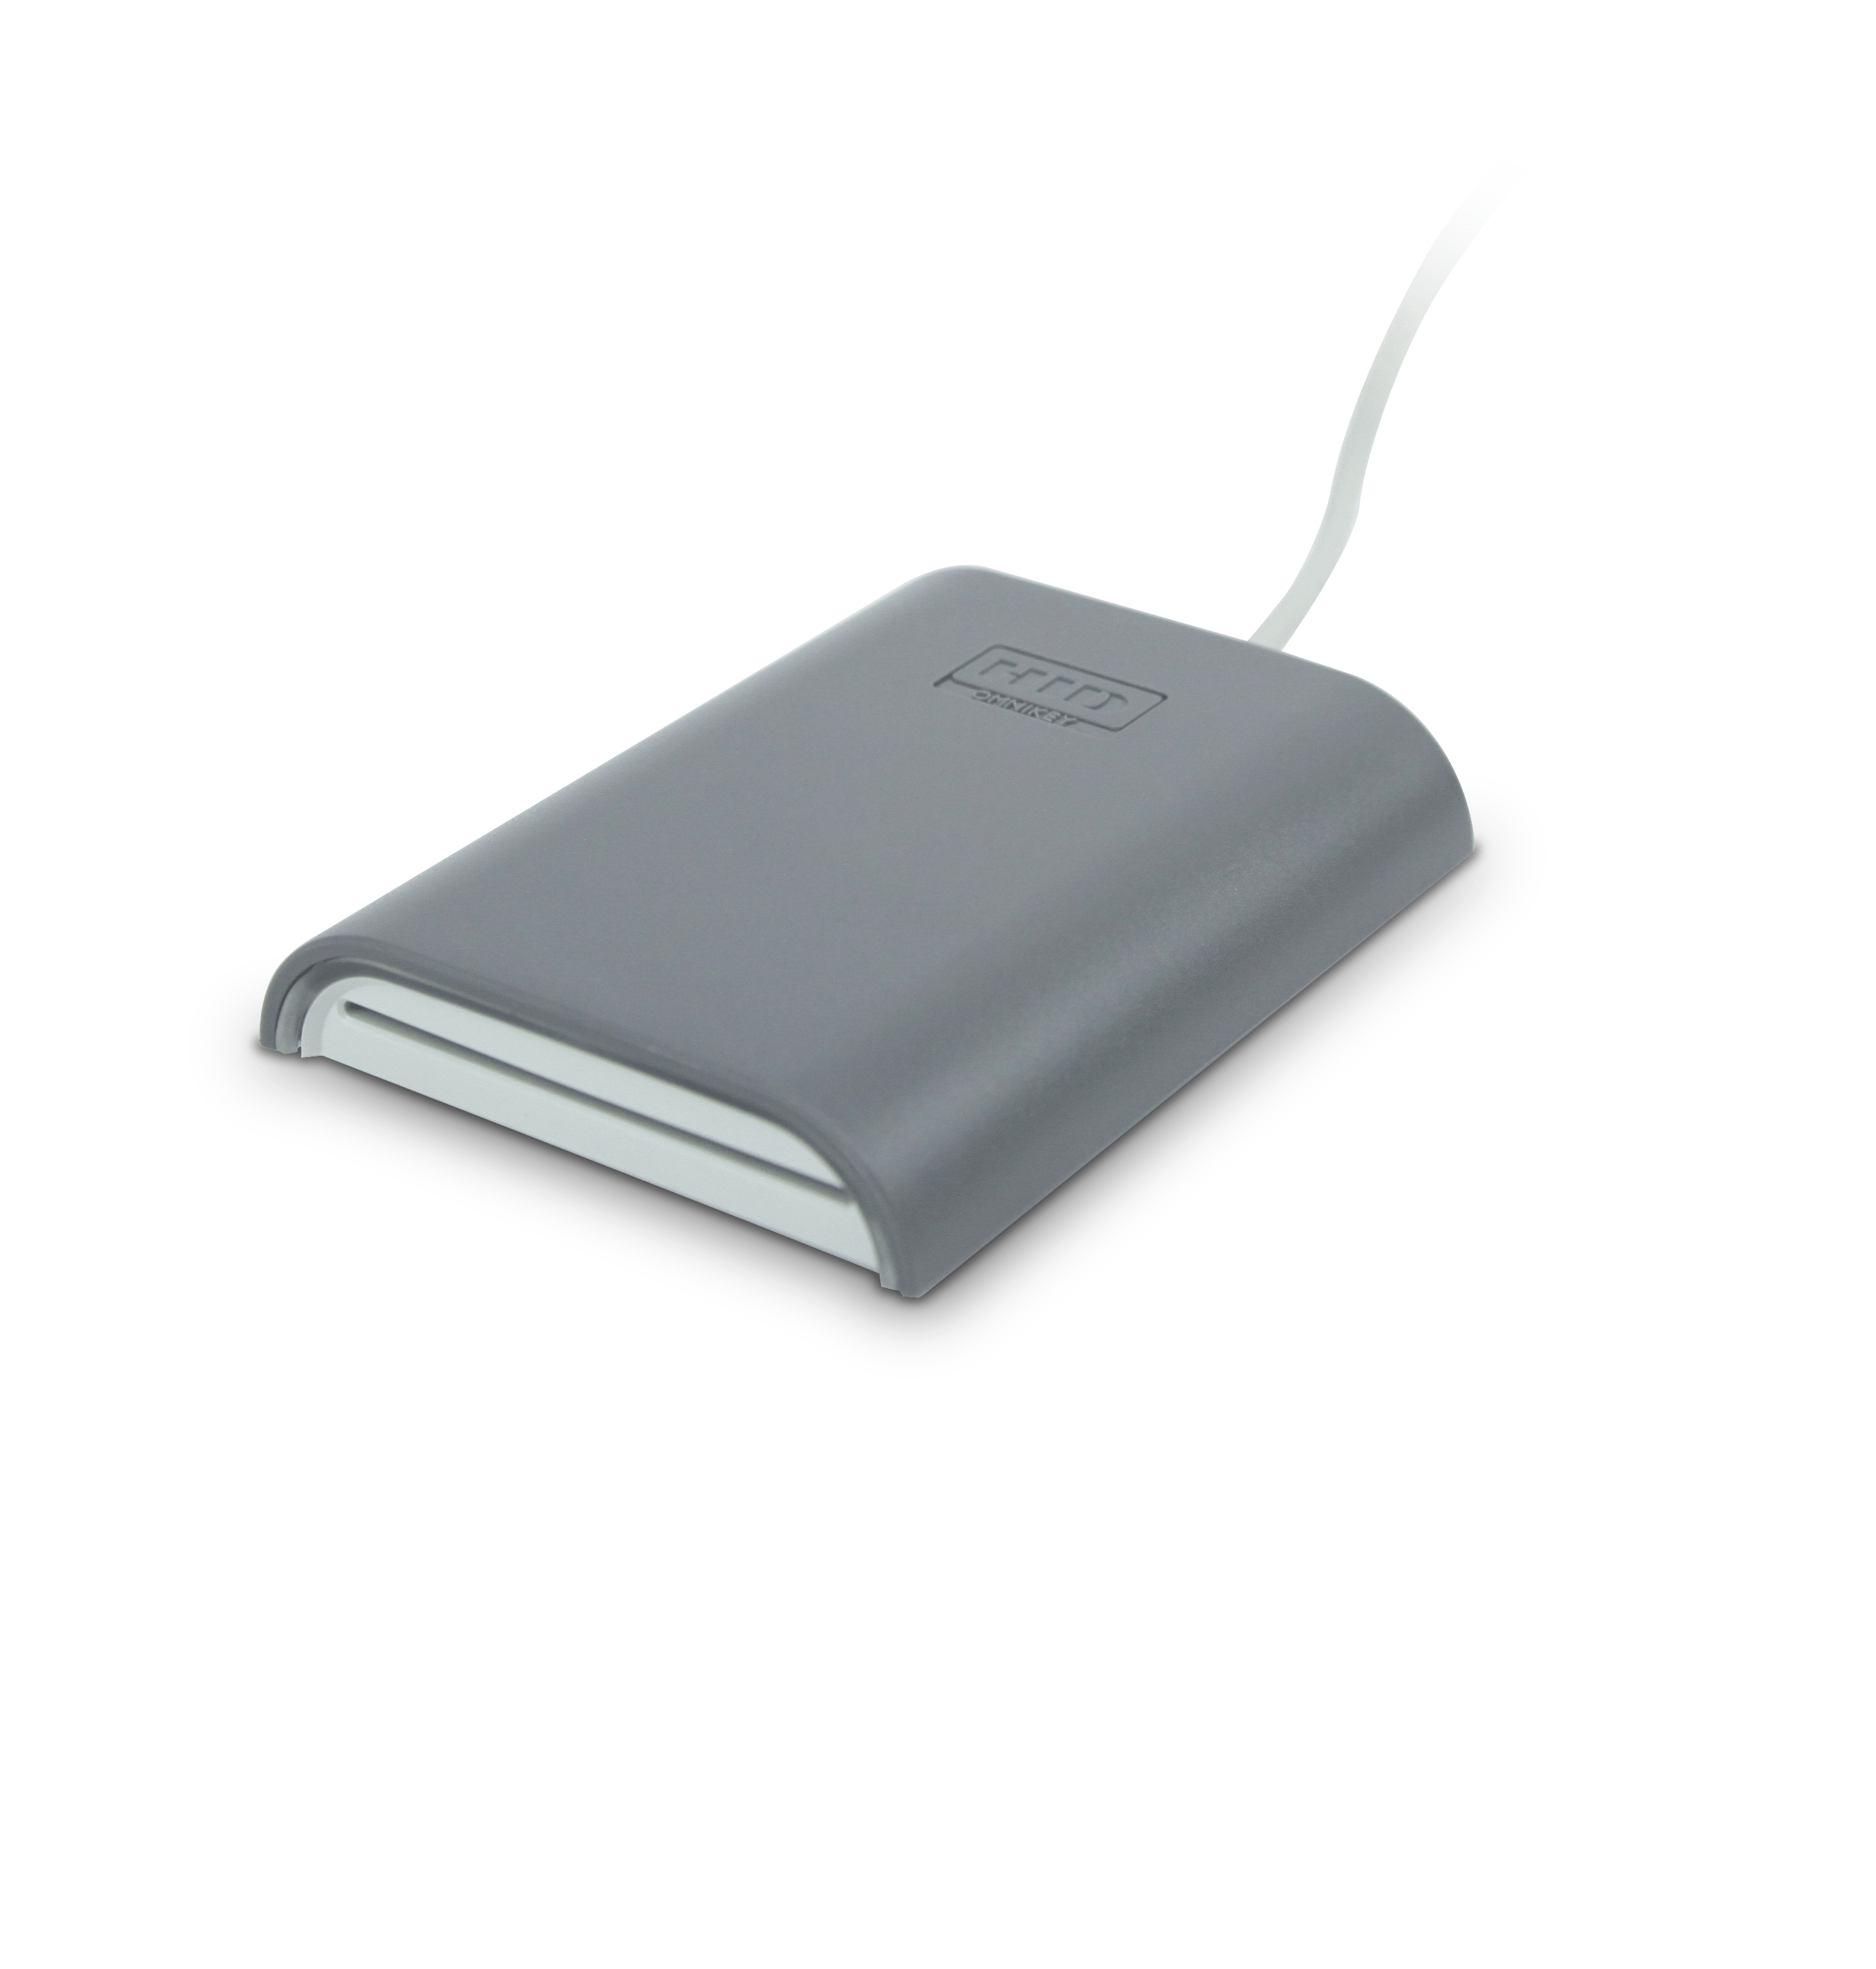 HID® OMNIKEY® 5422 Dual Interface Smart Card Reader is the perfect solution for environments needing to integrate and utilize both contact and contactless smart card technologies